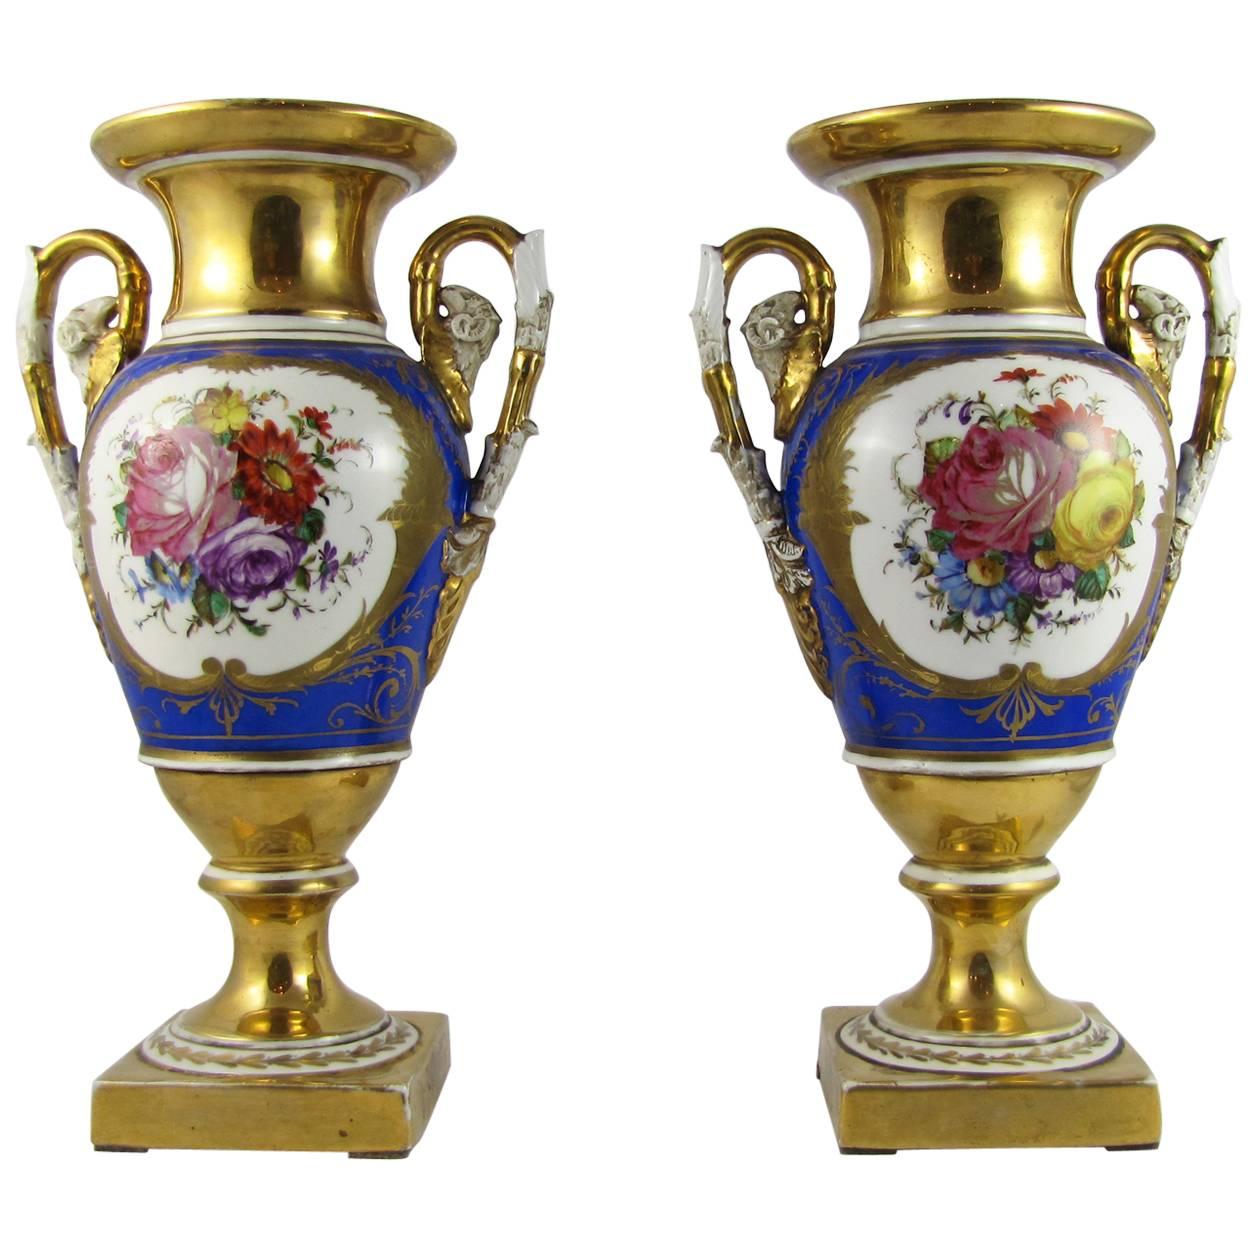 19th Century Pair of Parisian Empire Vases in Gilded and Polychrome Porcelain